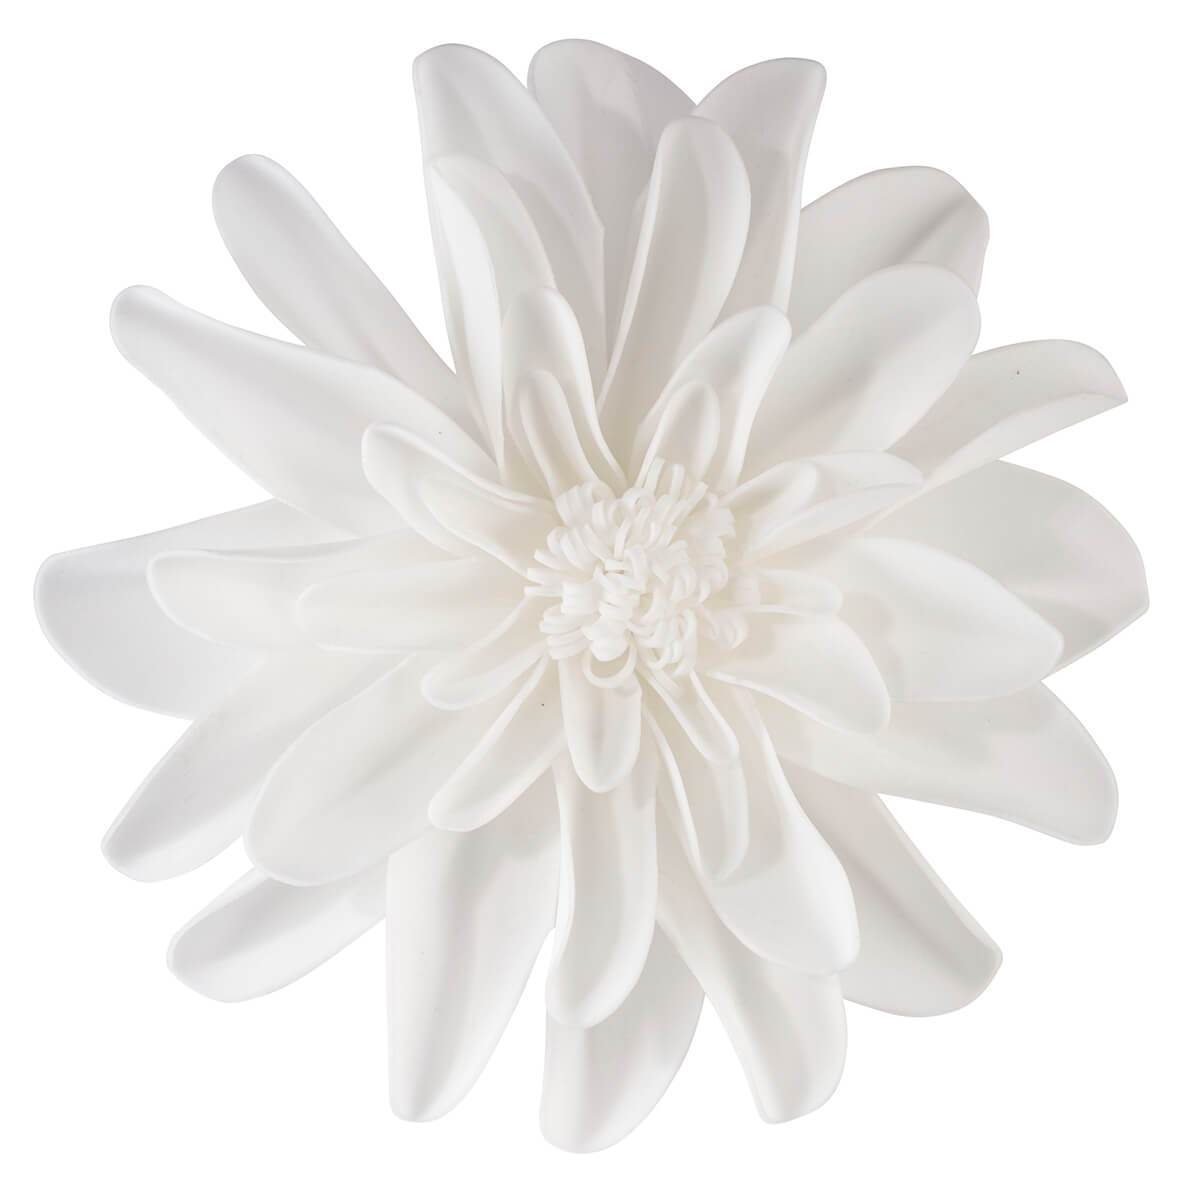 White 7.5 inch Flower Decorations Set of 2